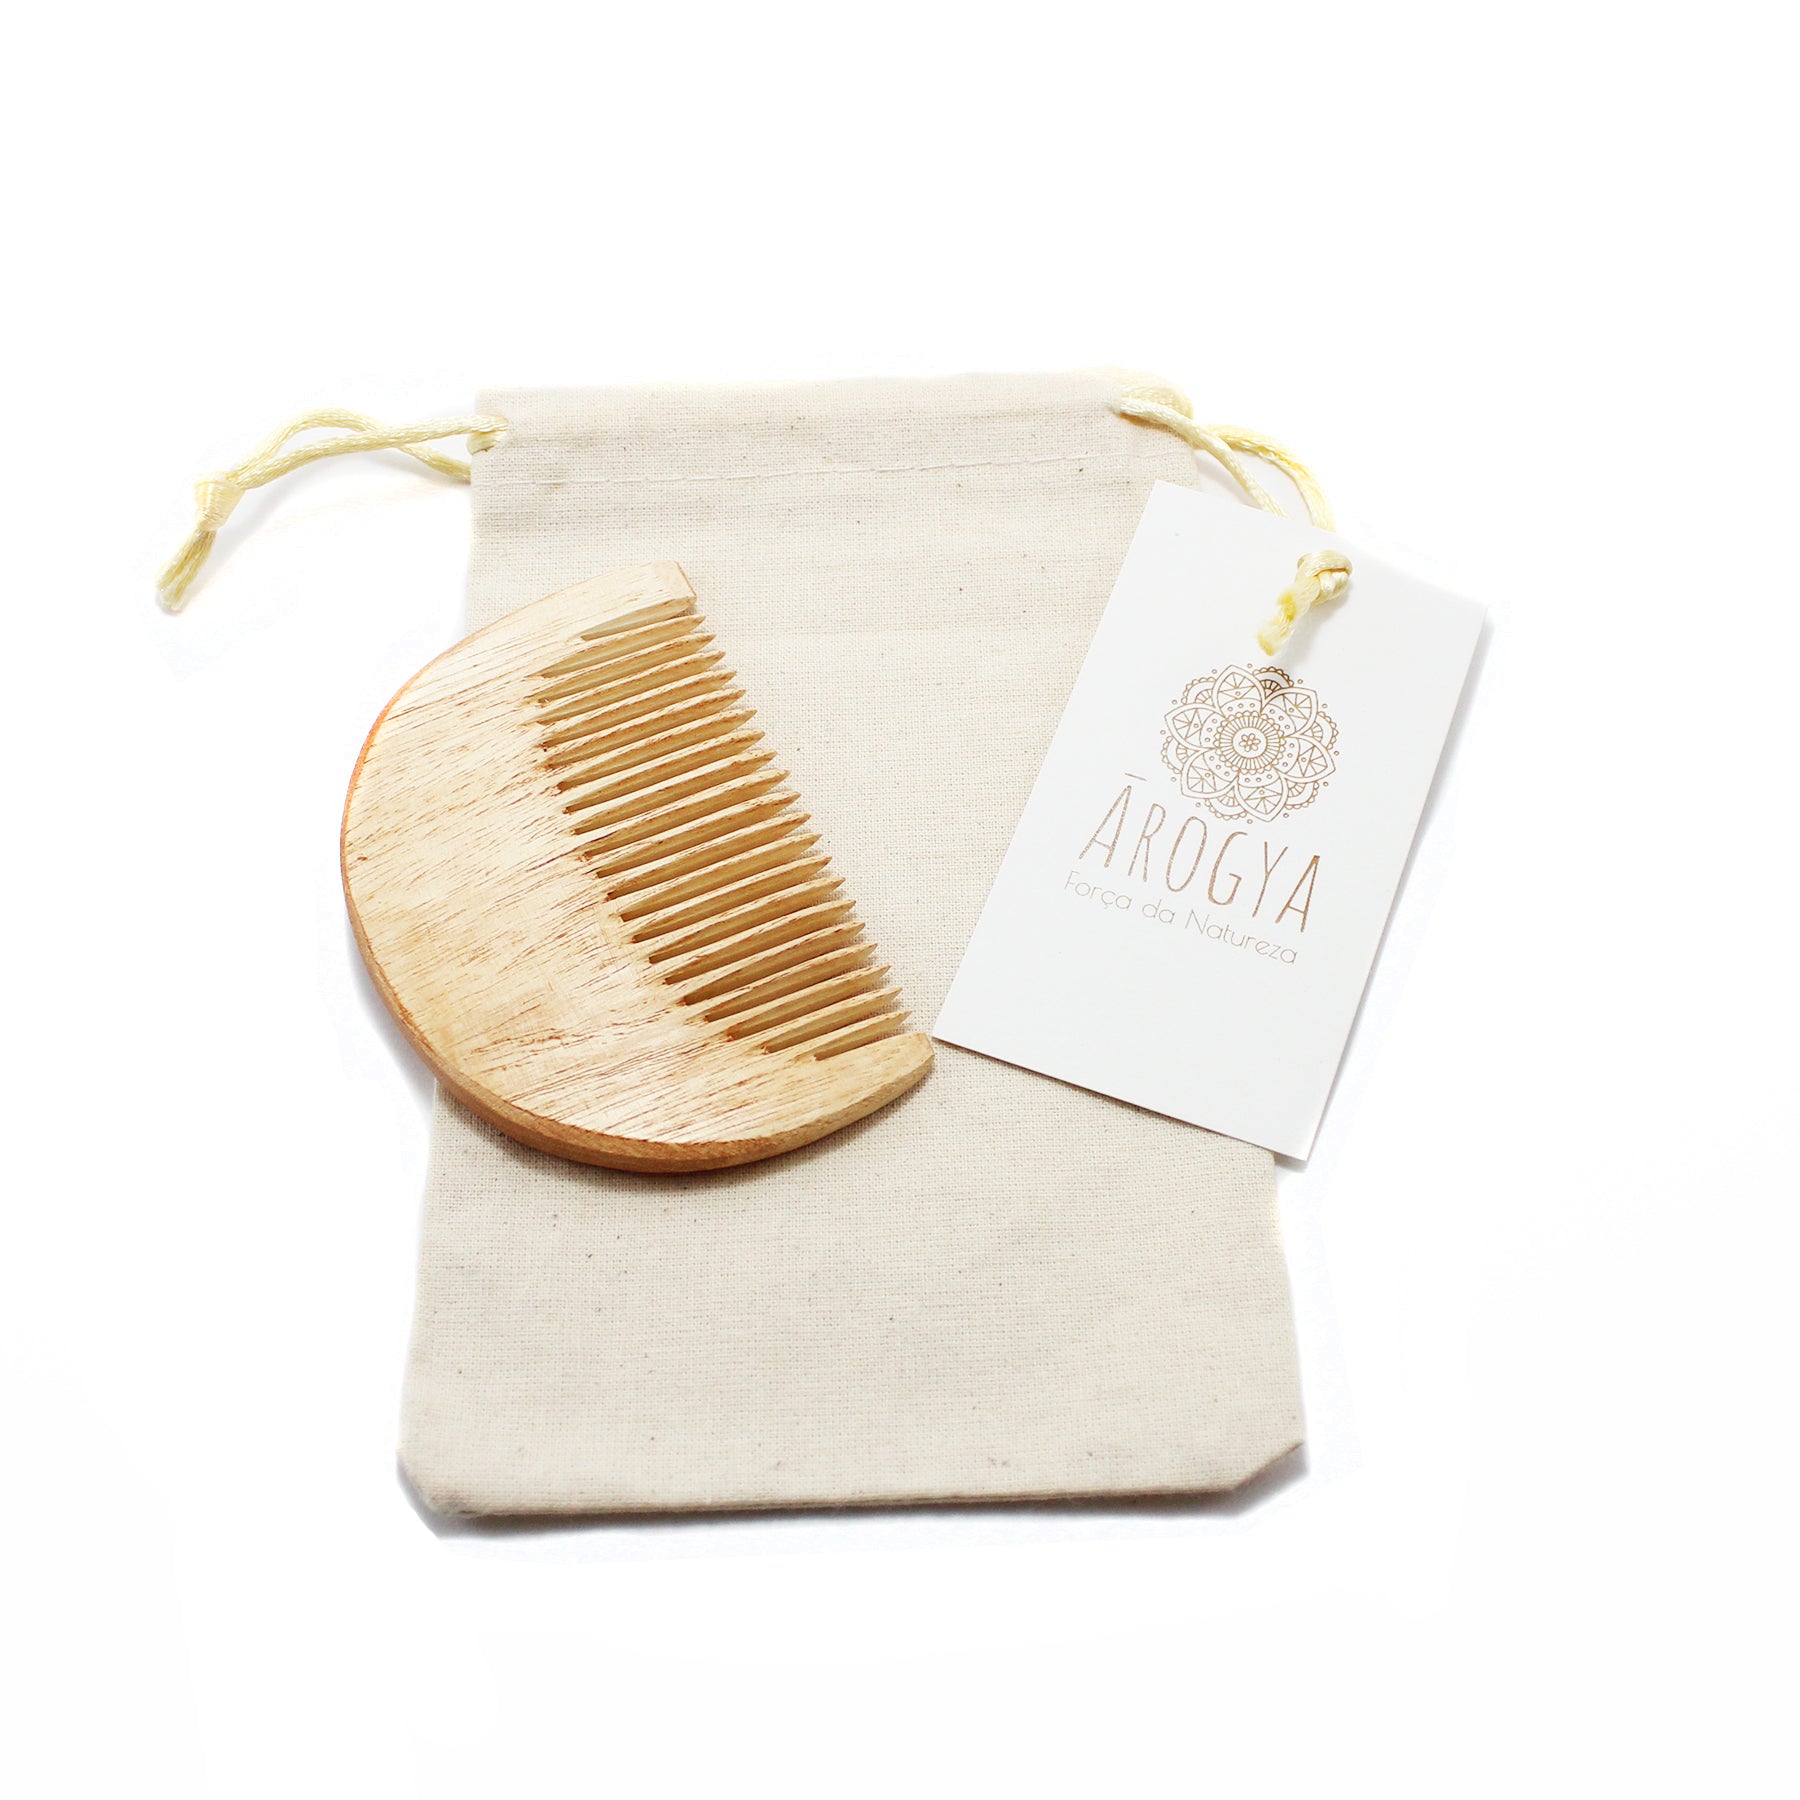 Gift set Soap, Oil and Beard Comb for Beard Care